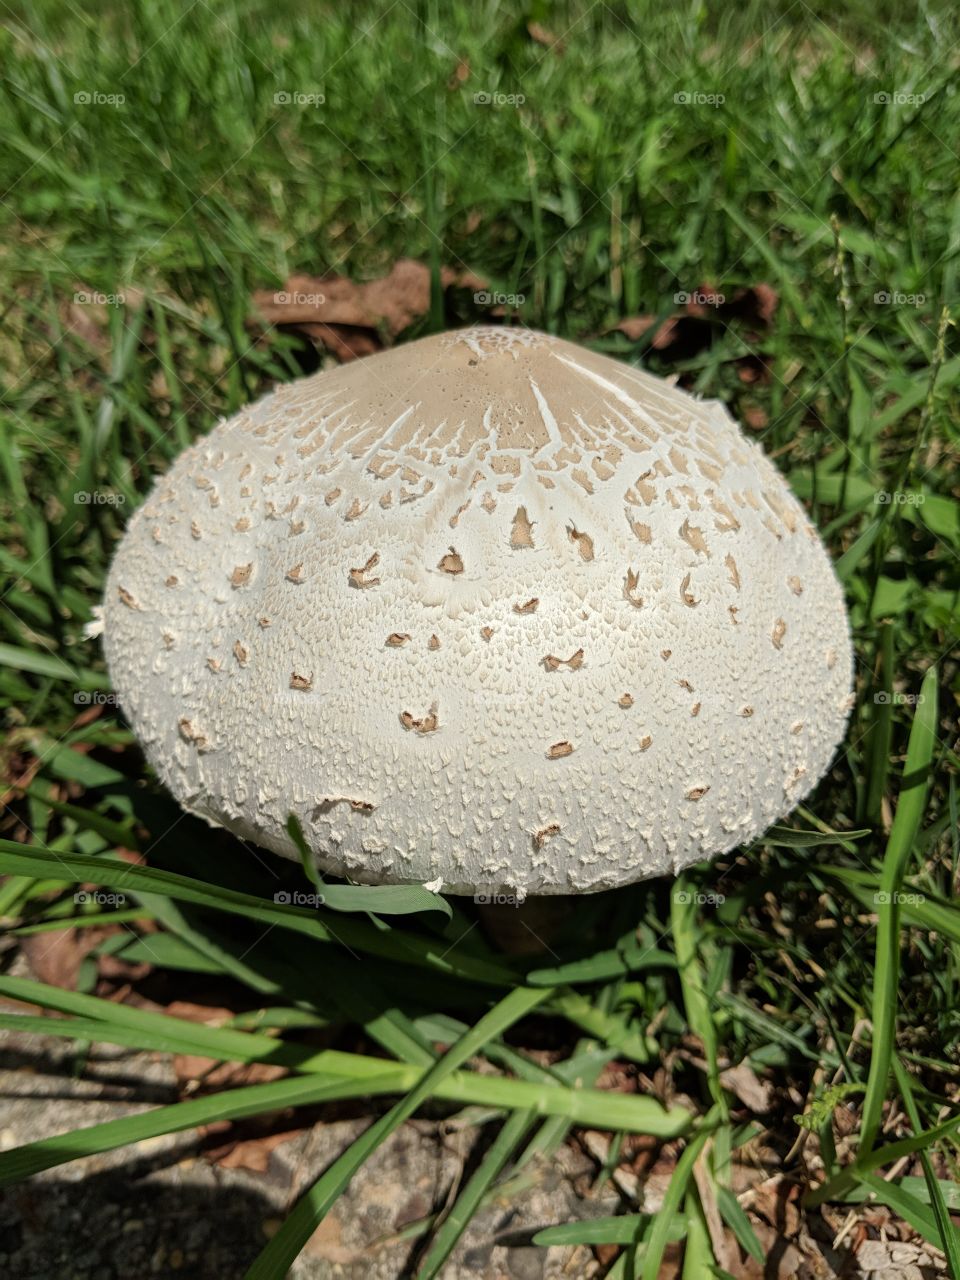 Textured taupe cap on a white mushroom nestled in green grass.